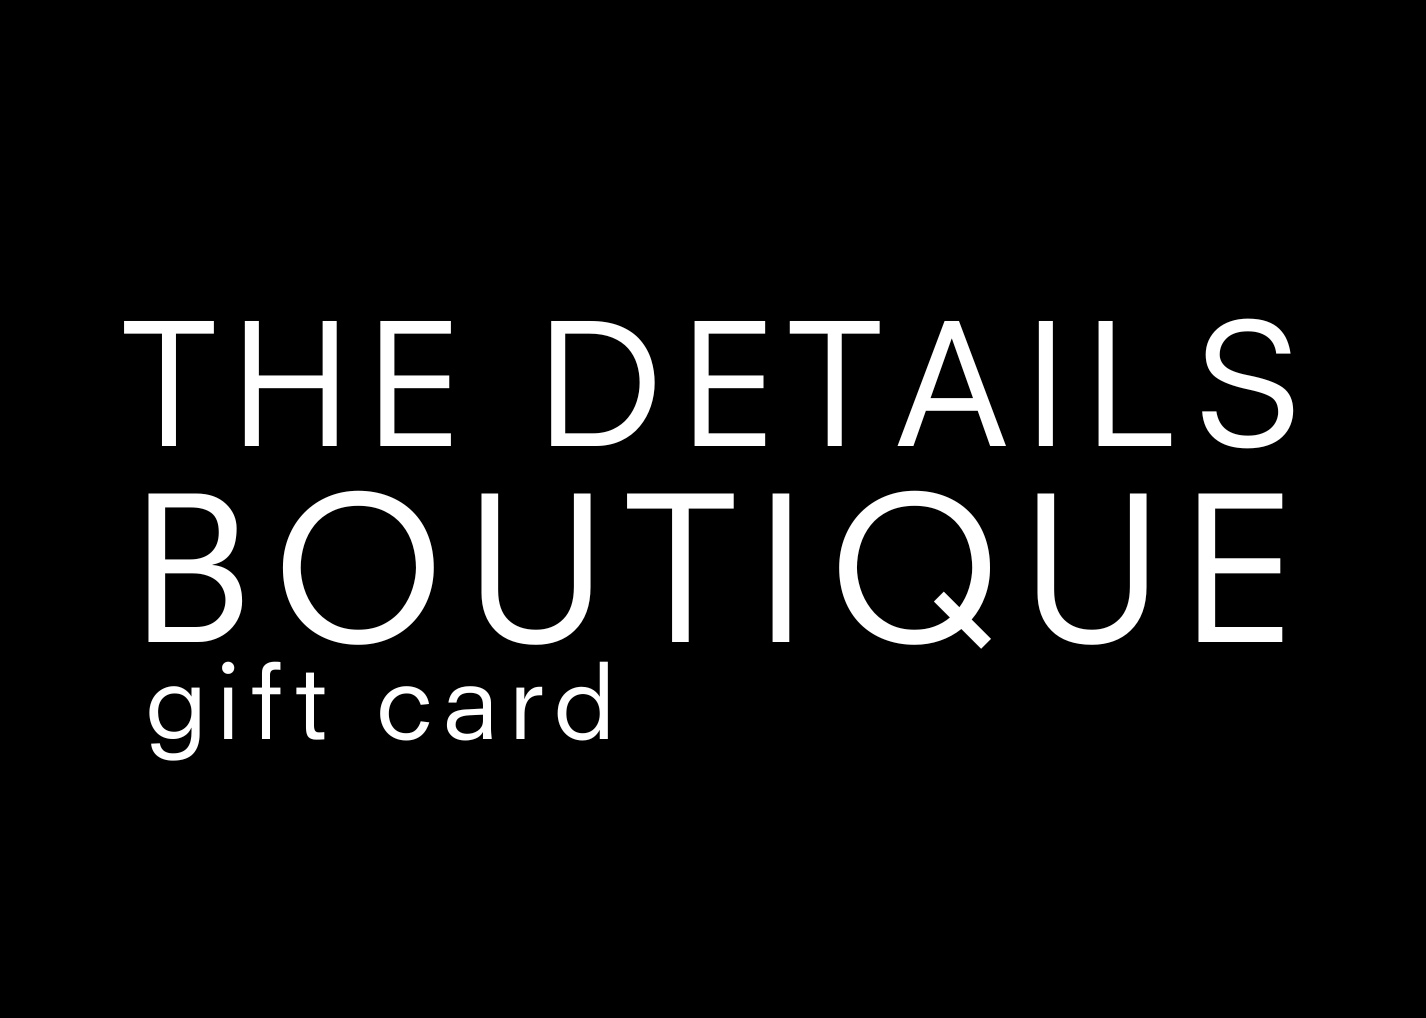 Gift Card - The Details Boutique